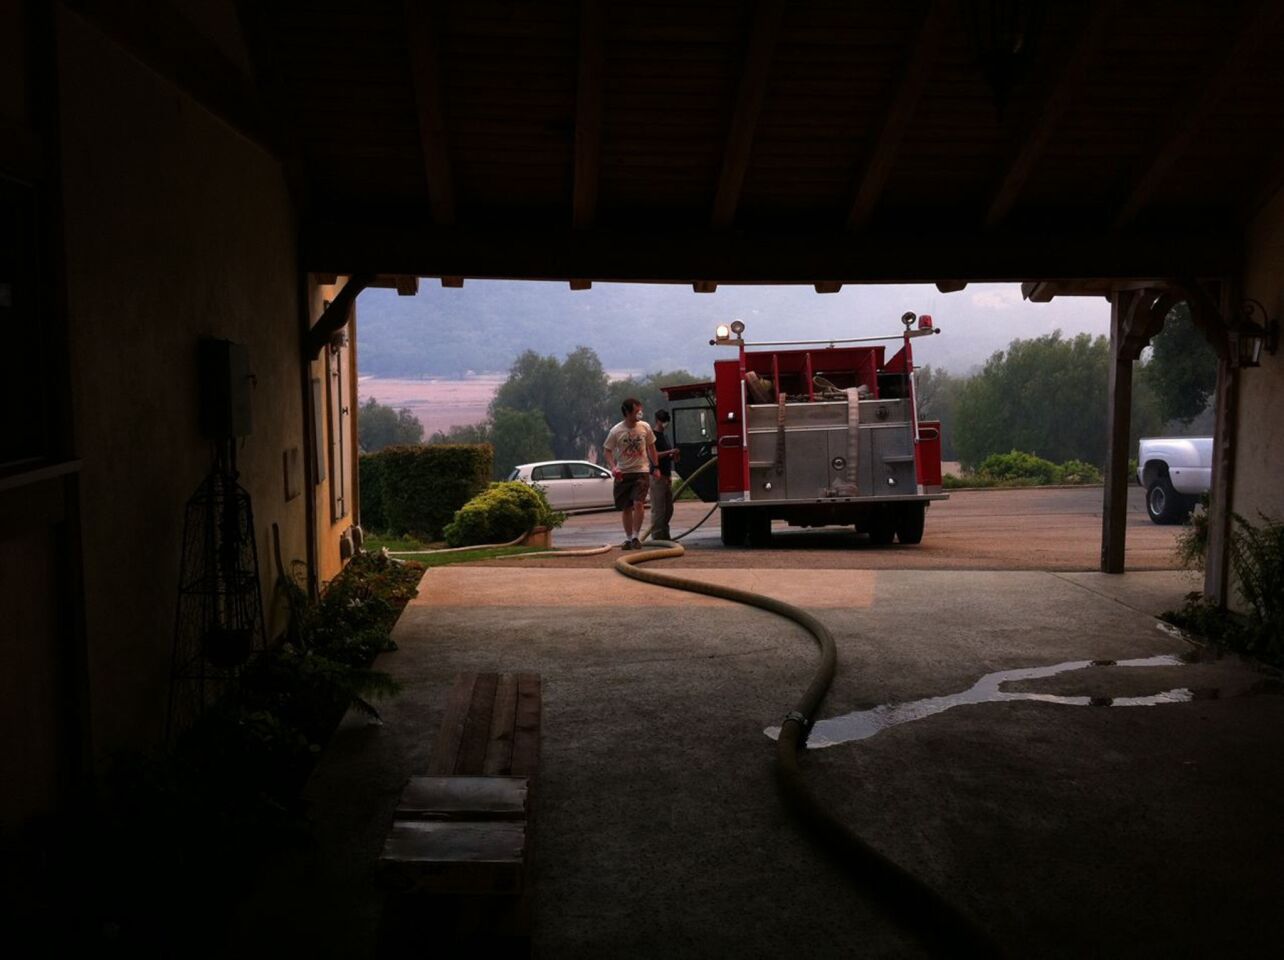 As dawn breaks Saturday and cooler onshore winds push the Springs fire back on itself, a man walks past a fire truck stationed in the driveway of a home to provide protection for a Thousand Oaks neighborhood.